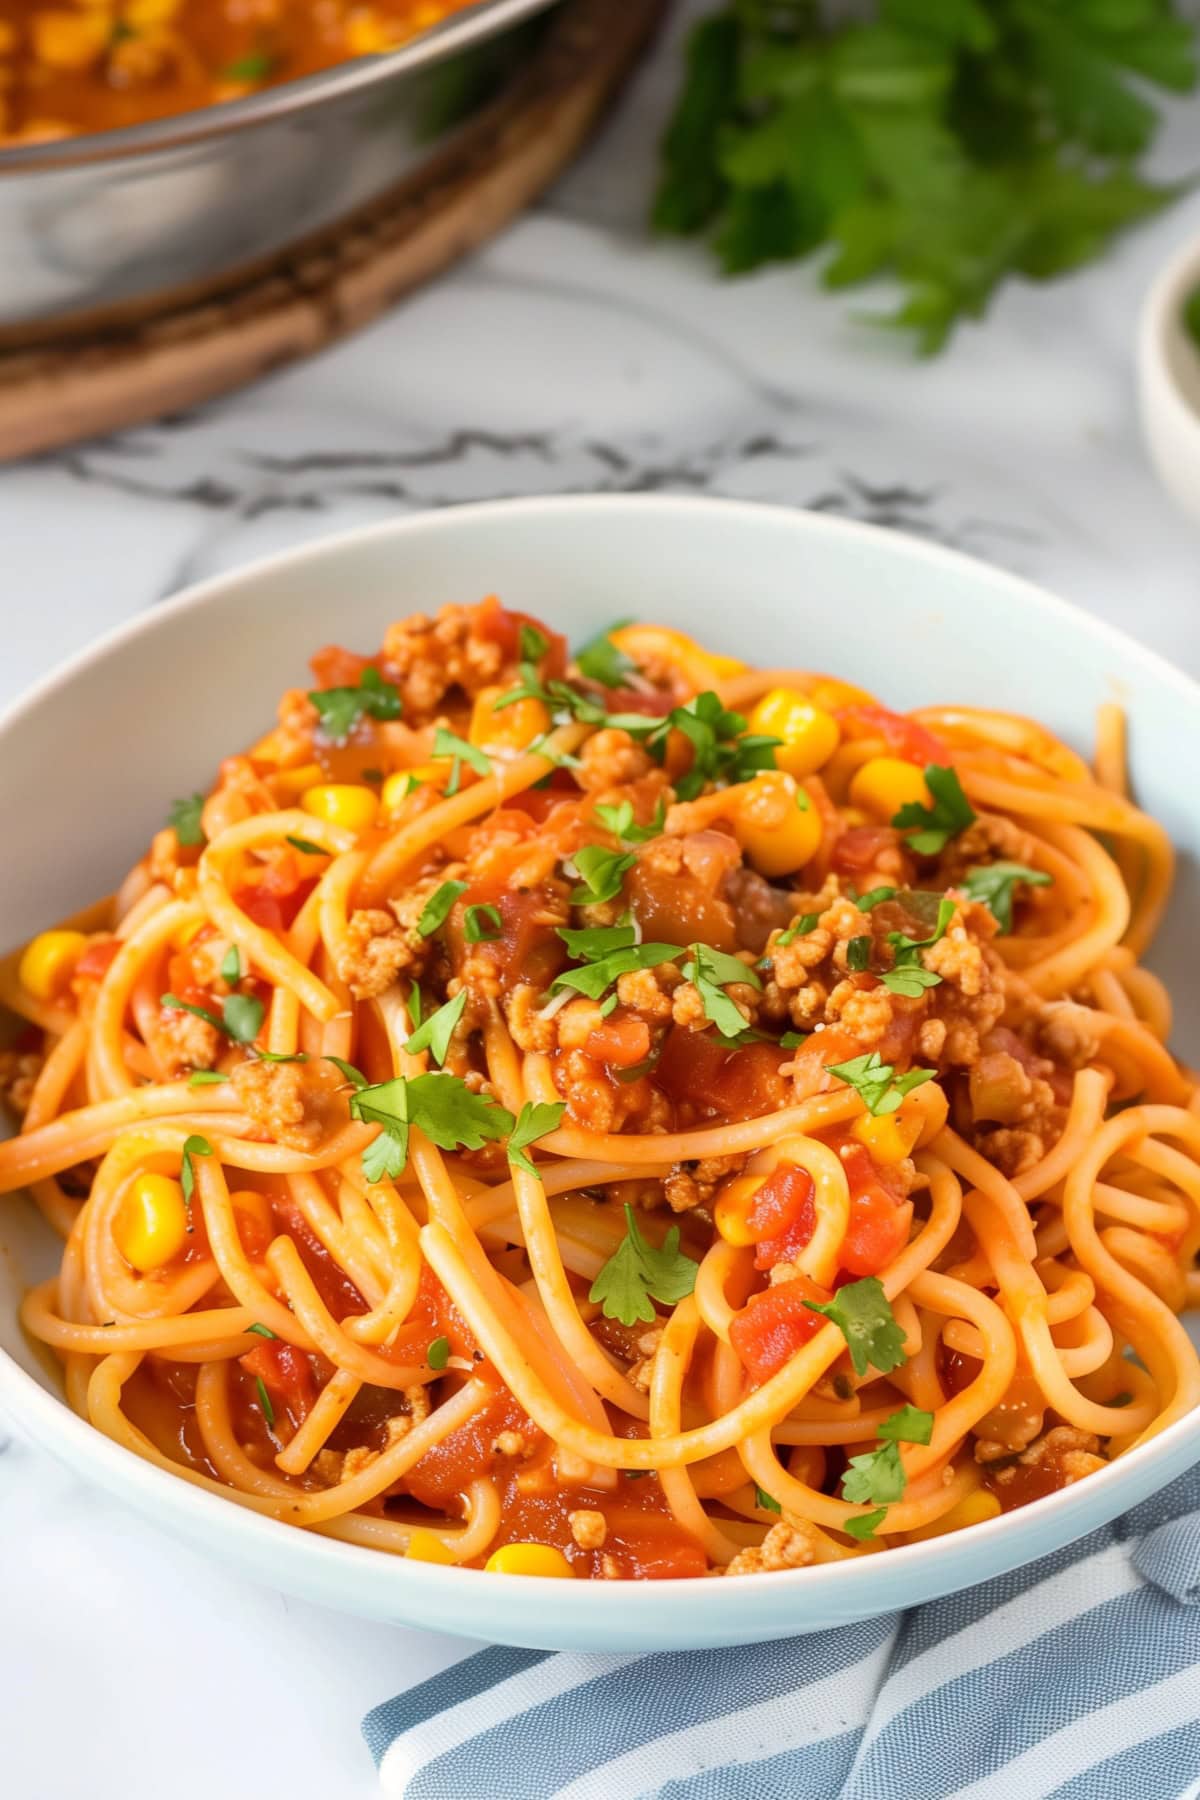 Flavorful Mexican spaghetti, featuring a zesty tomato sauce in a white plate.